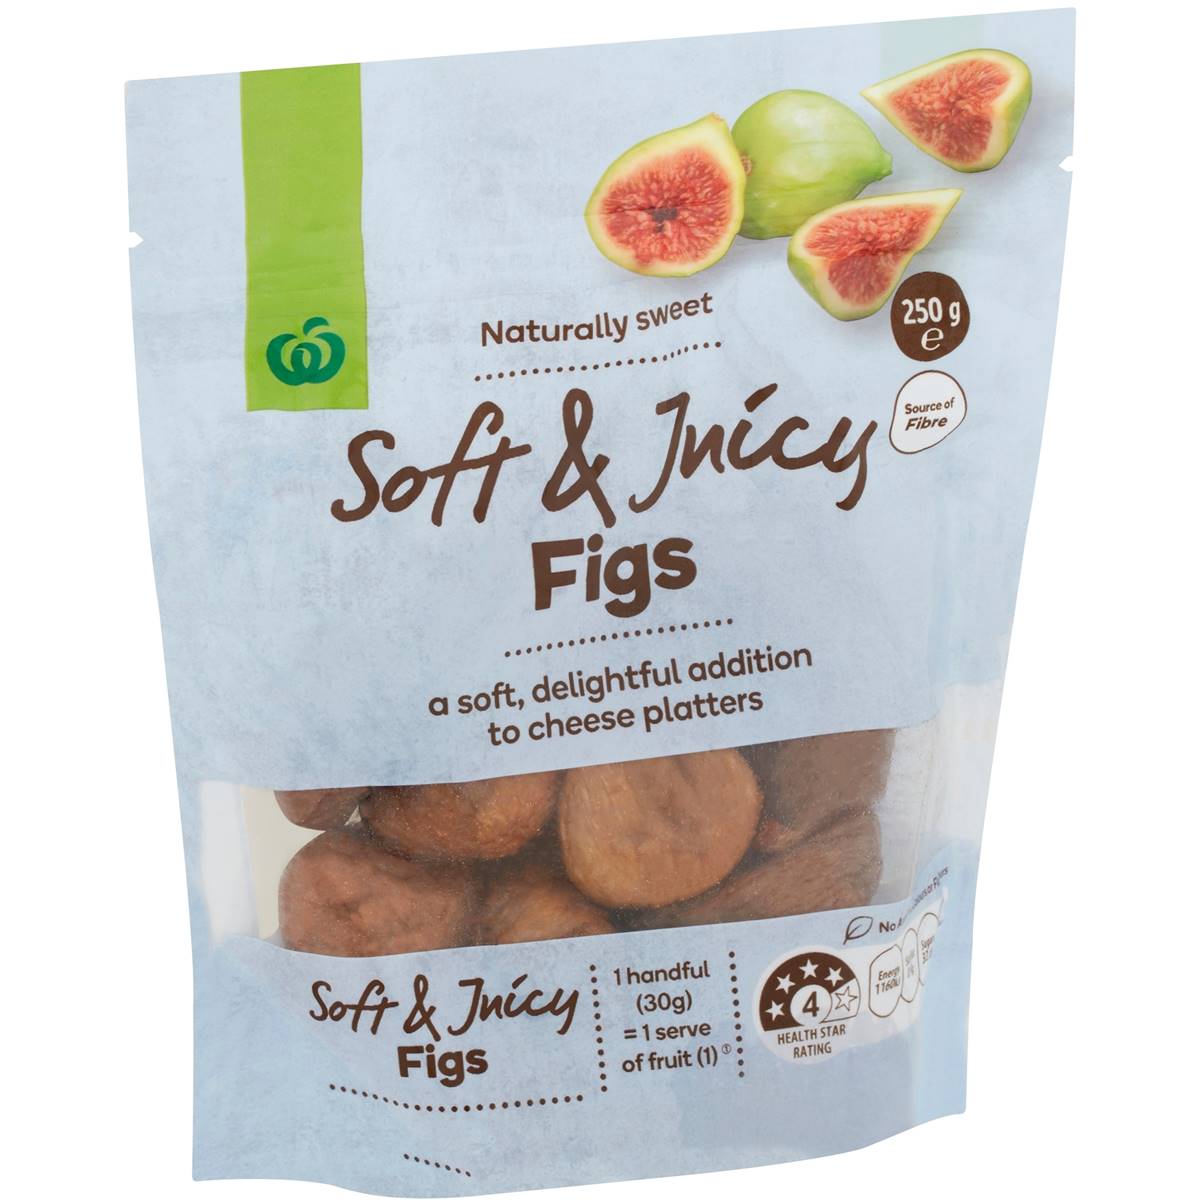 Calories in Woolworths Soft & Juicy Figs